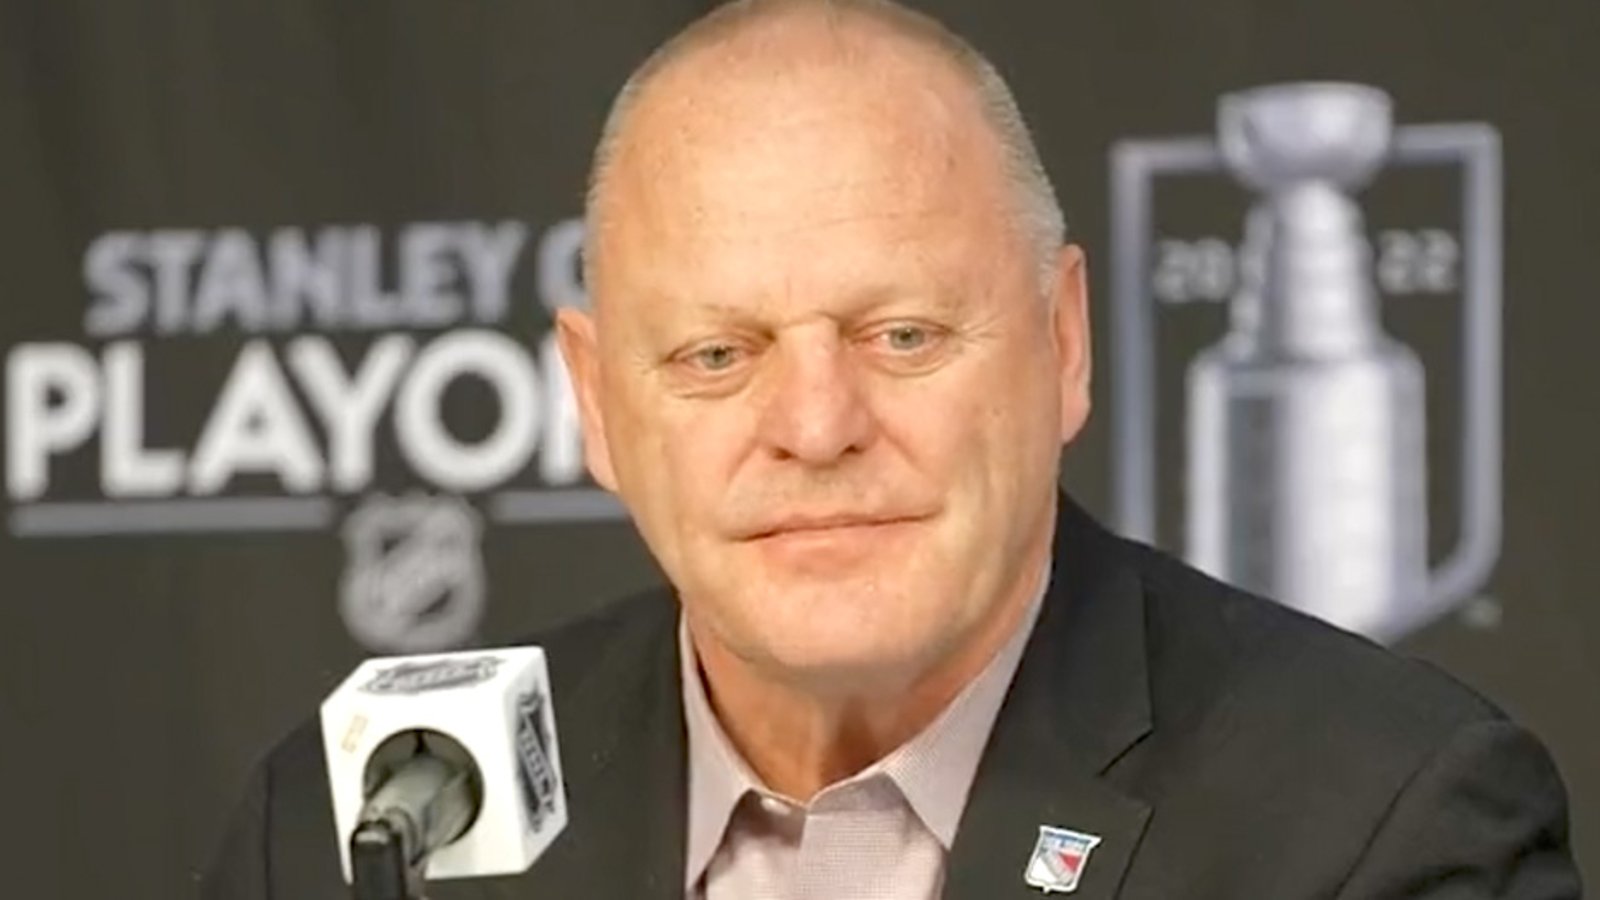 Rangers coach Gerard Gallant RIPS his “soft” team after Game 4 loss! 